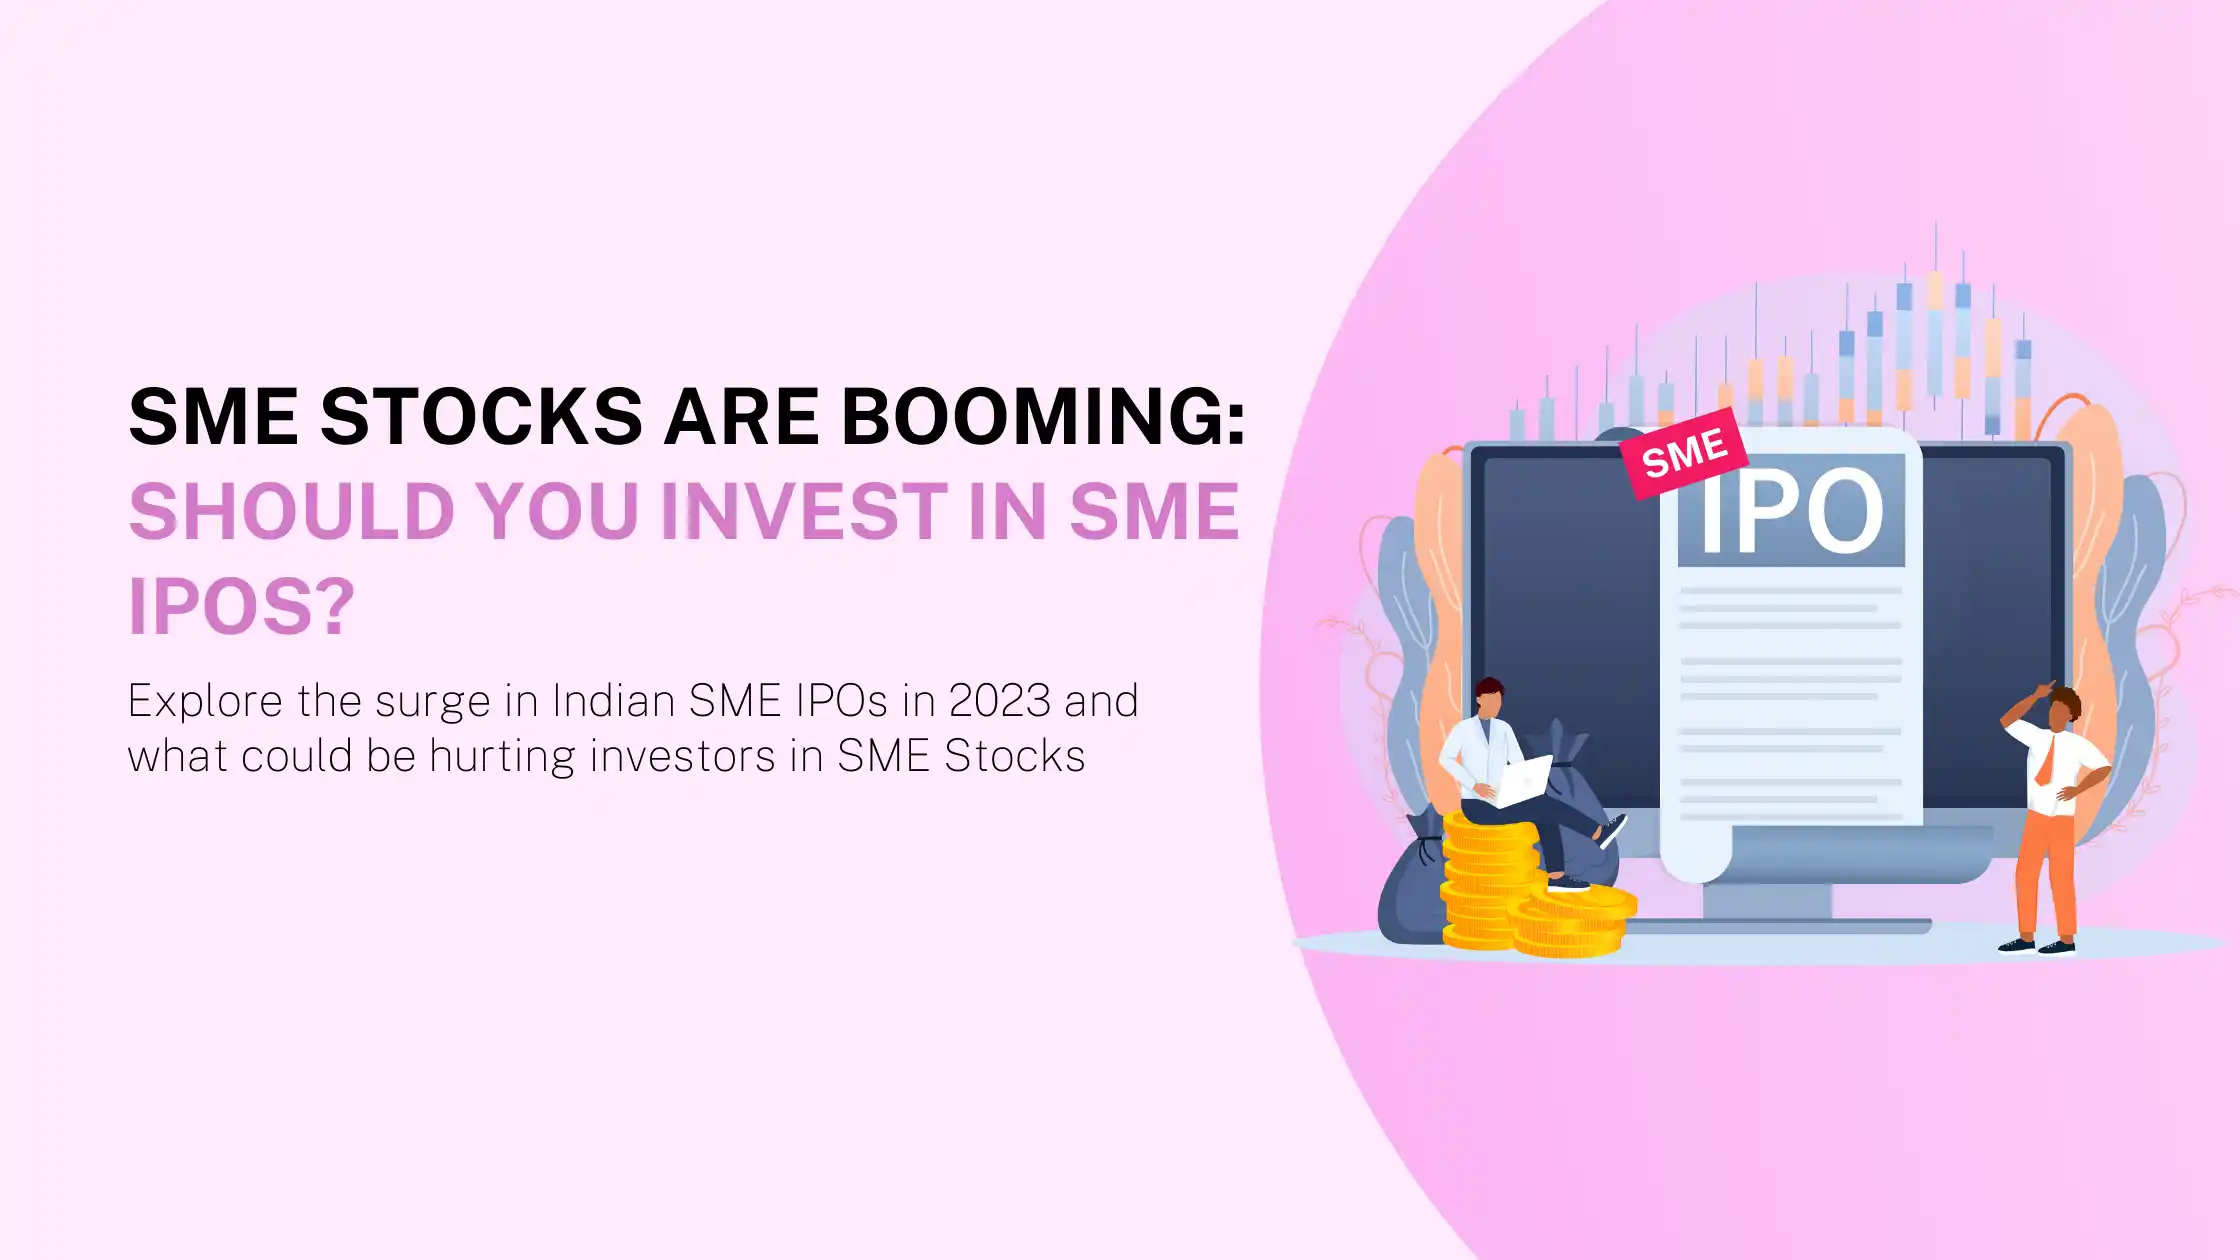 SME Stocks Are Booming: Should You Invest In SME IPOs?